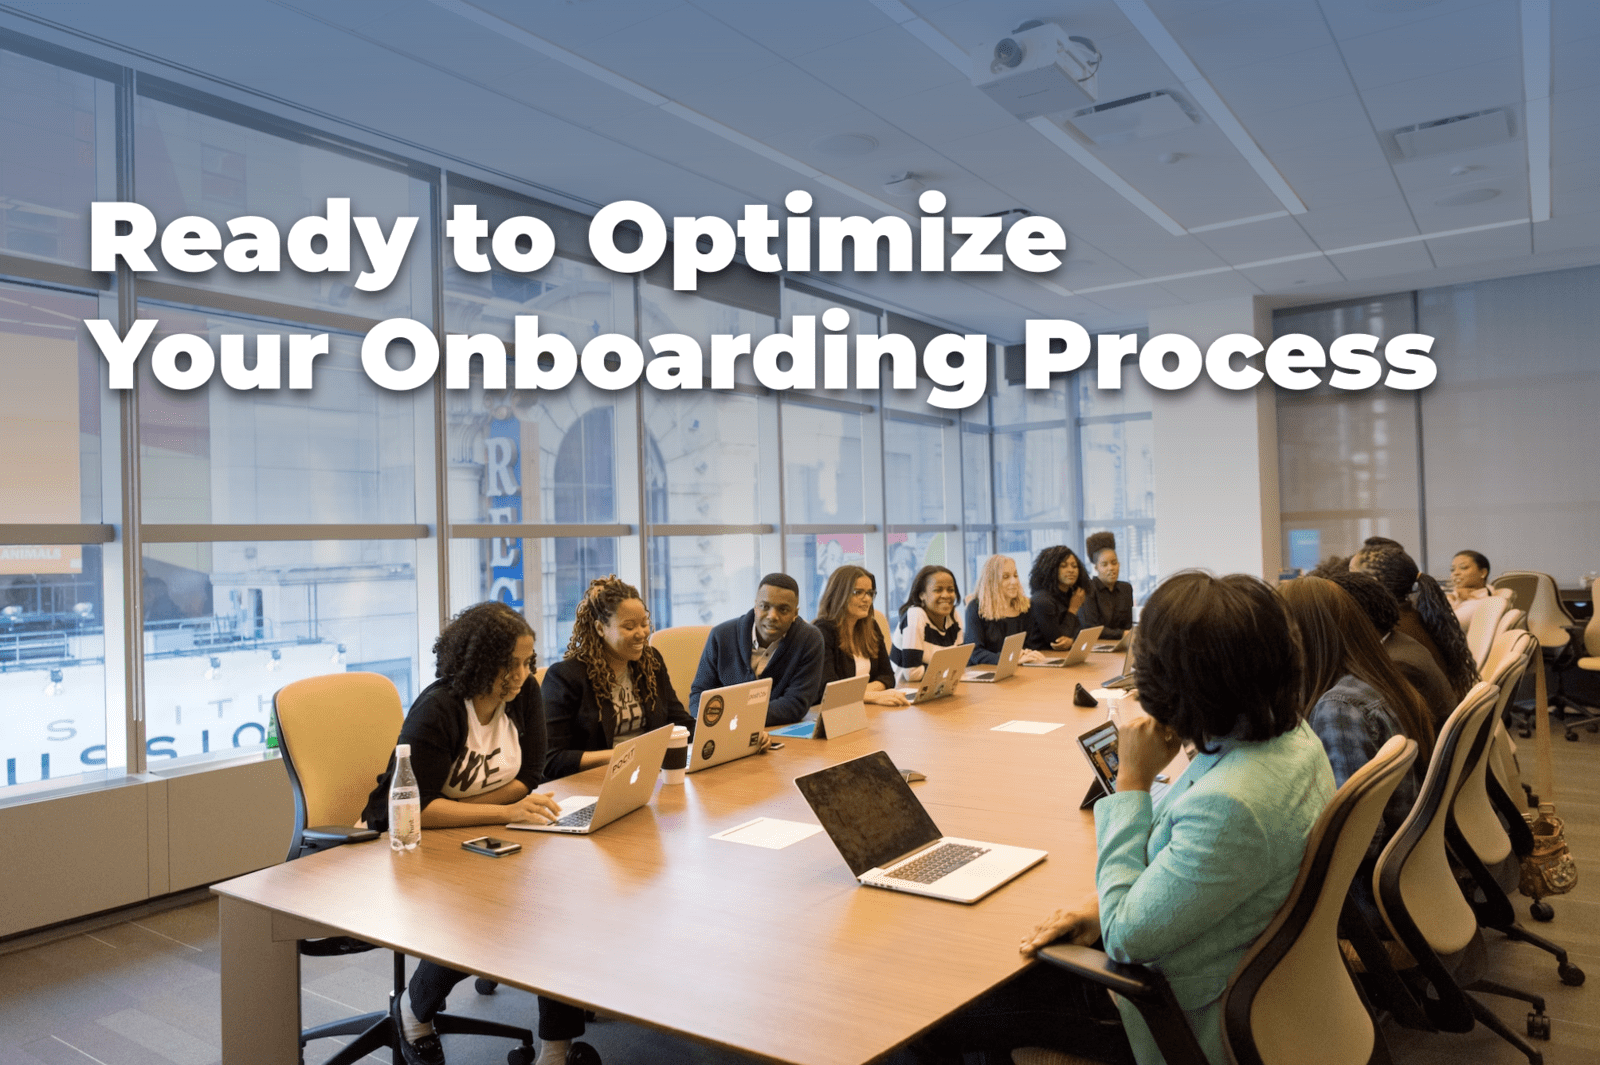 Ready to Optimize Your Onboarding Process?  It's Time to Consider a Sales Enablement Platform